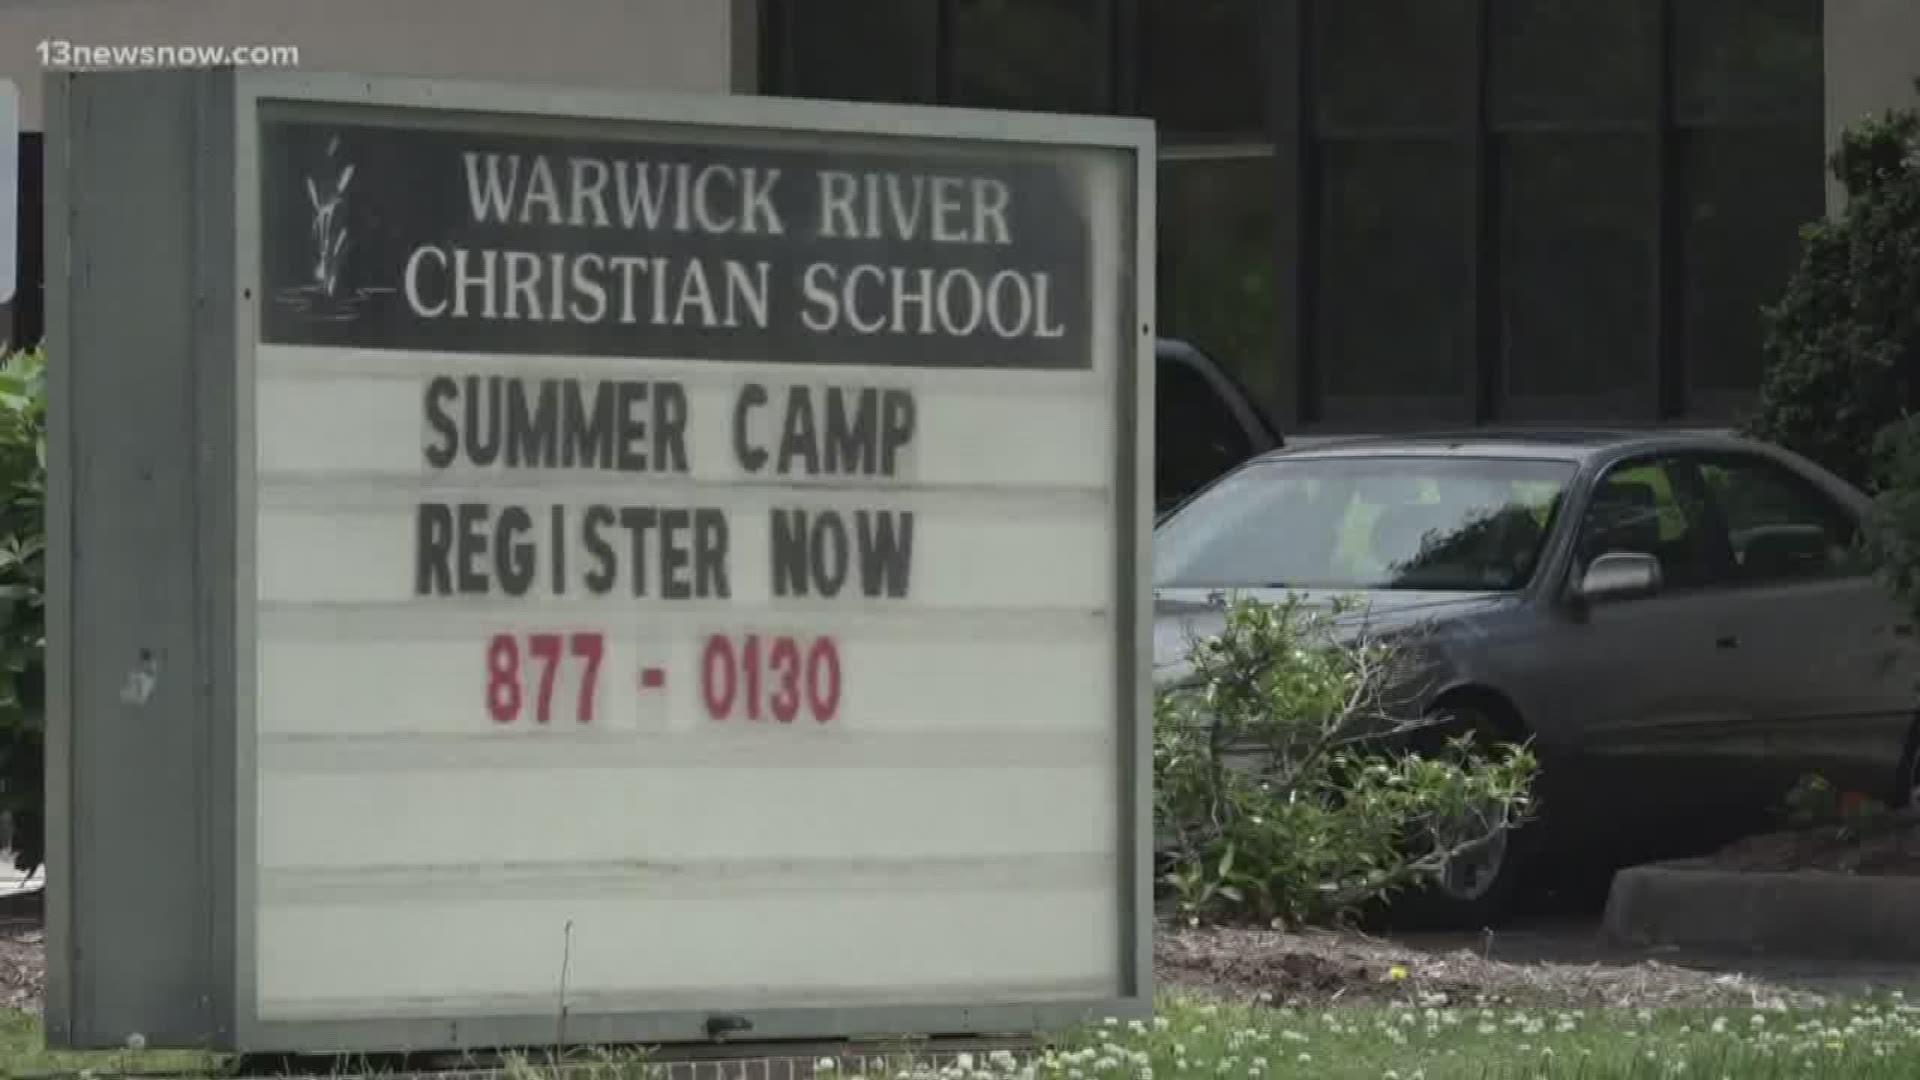 The Warwick River Christian School is in danger of closing at the end of the school year because the board is pulling out. Now parents are trying to raise $500,000 by June 1 to keep the school open at least one more year.